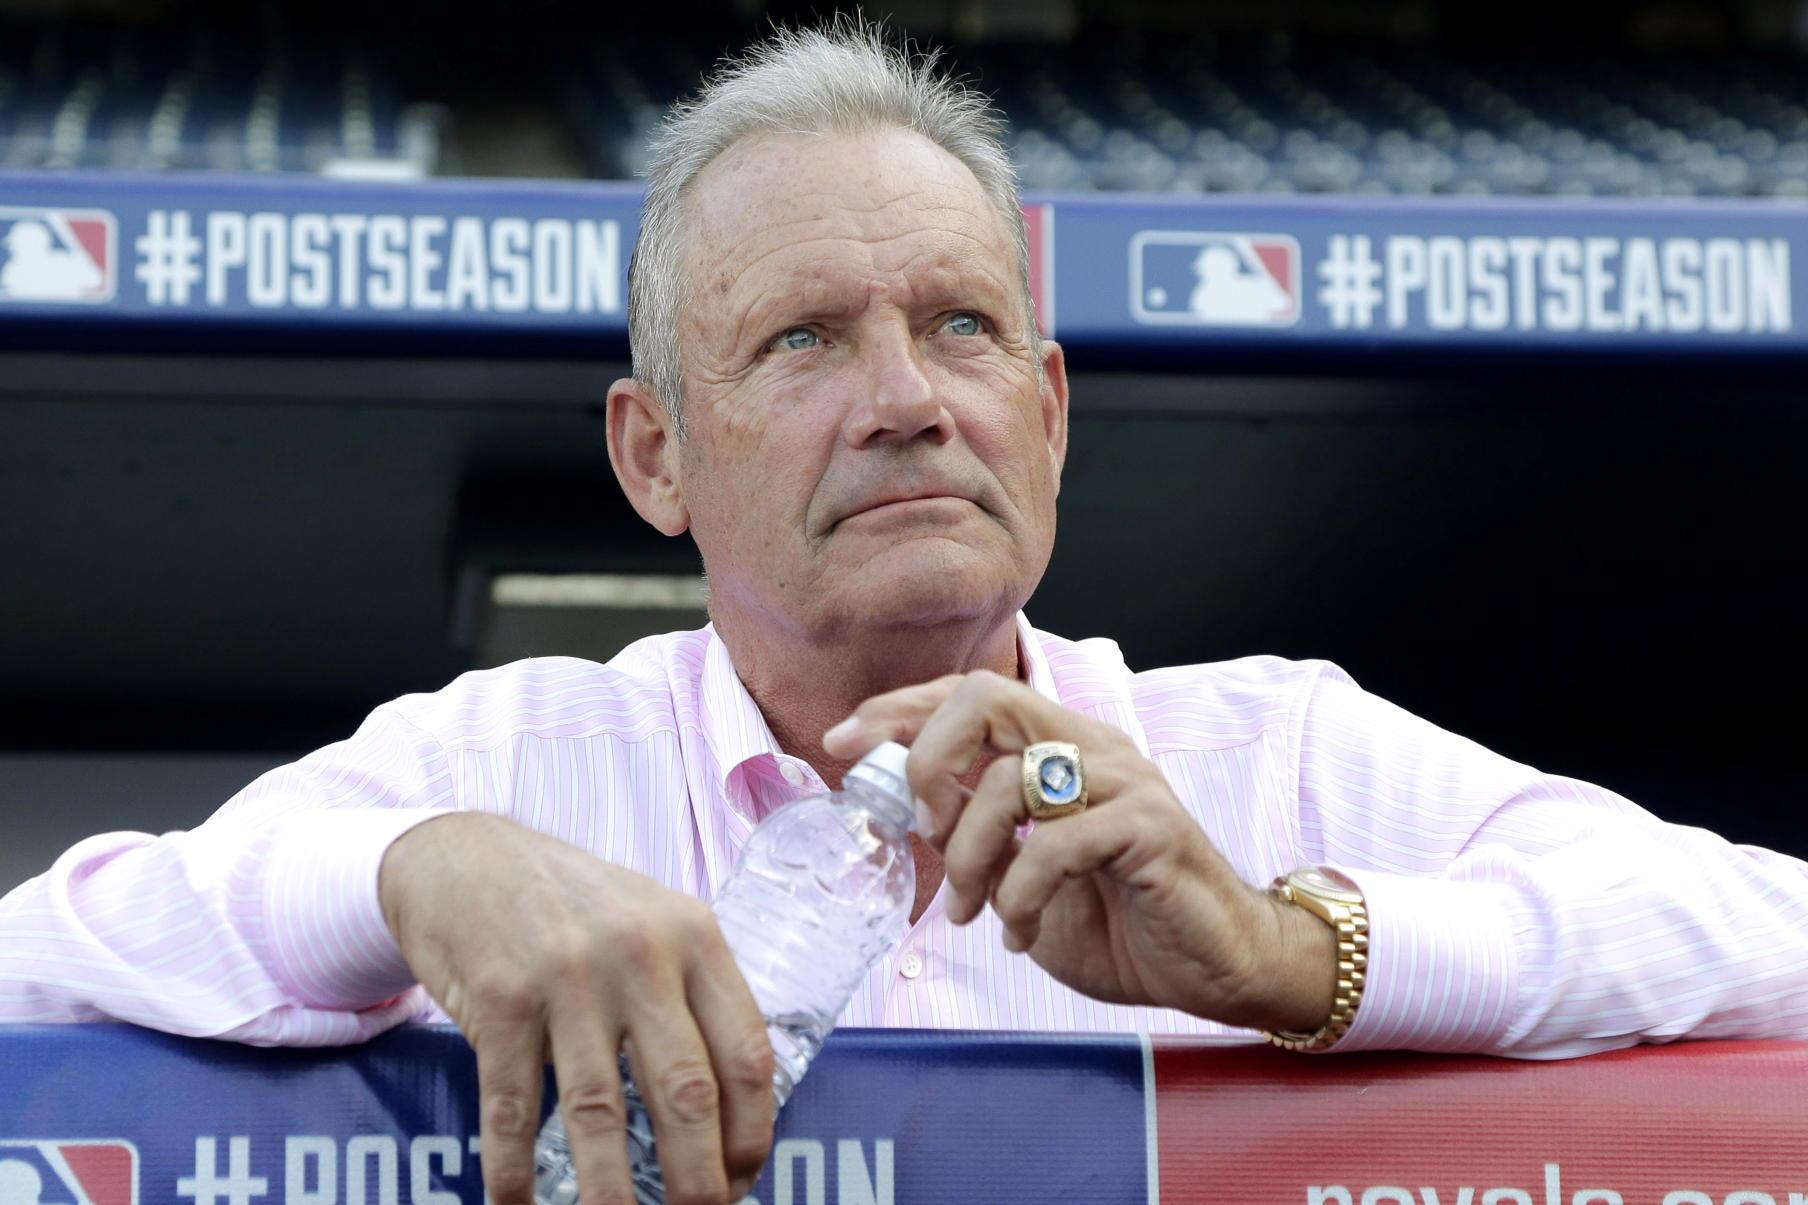 Happy 62nd birthday today to baseball great, George Brett. Third baseman for the KC Royals for 21 seasons. 